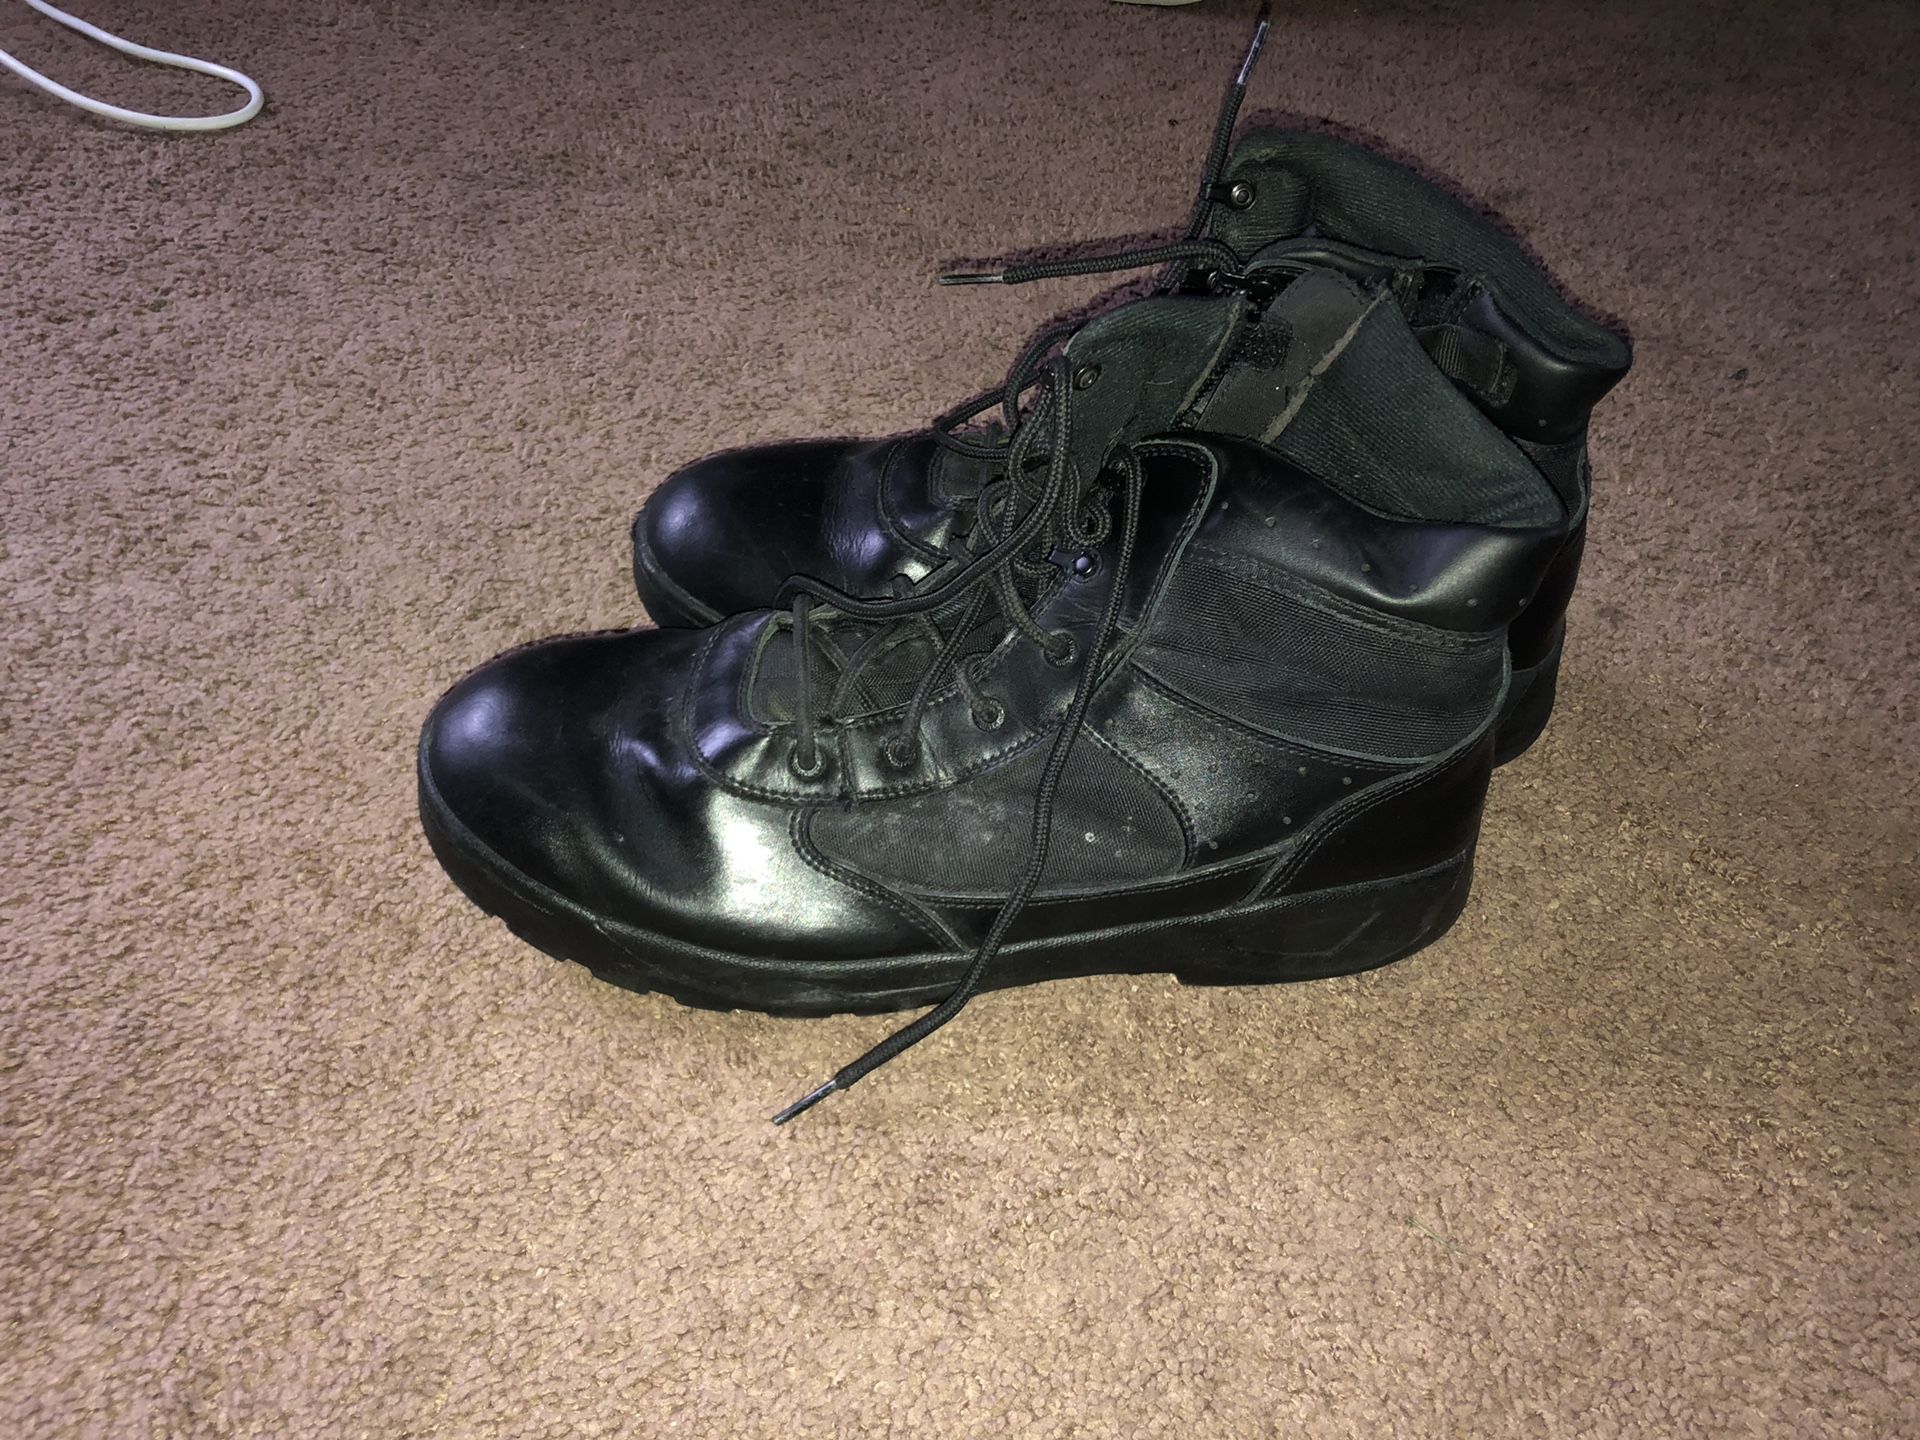 Work boots/ normal wear size 13.5